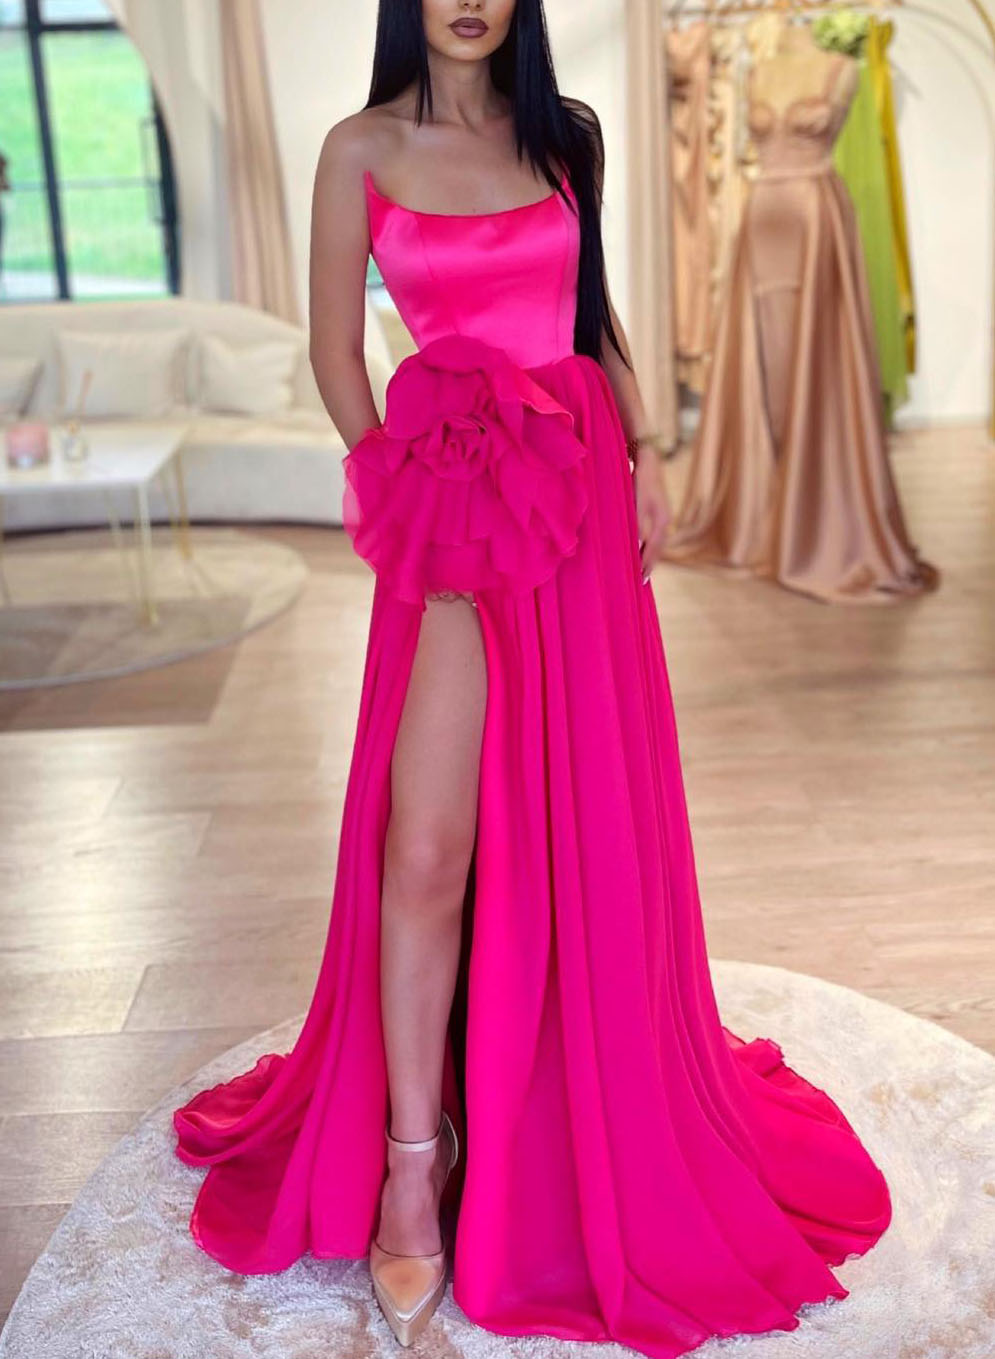 Hot Pink Strapless Satin Chiffon Prom Dresses With Flower